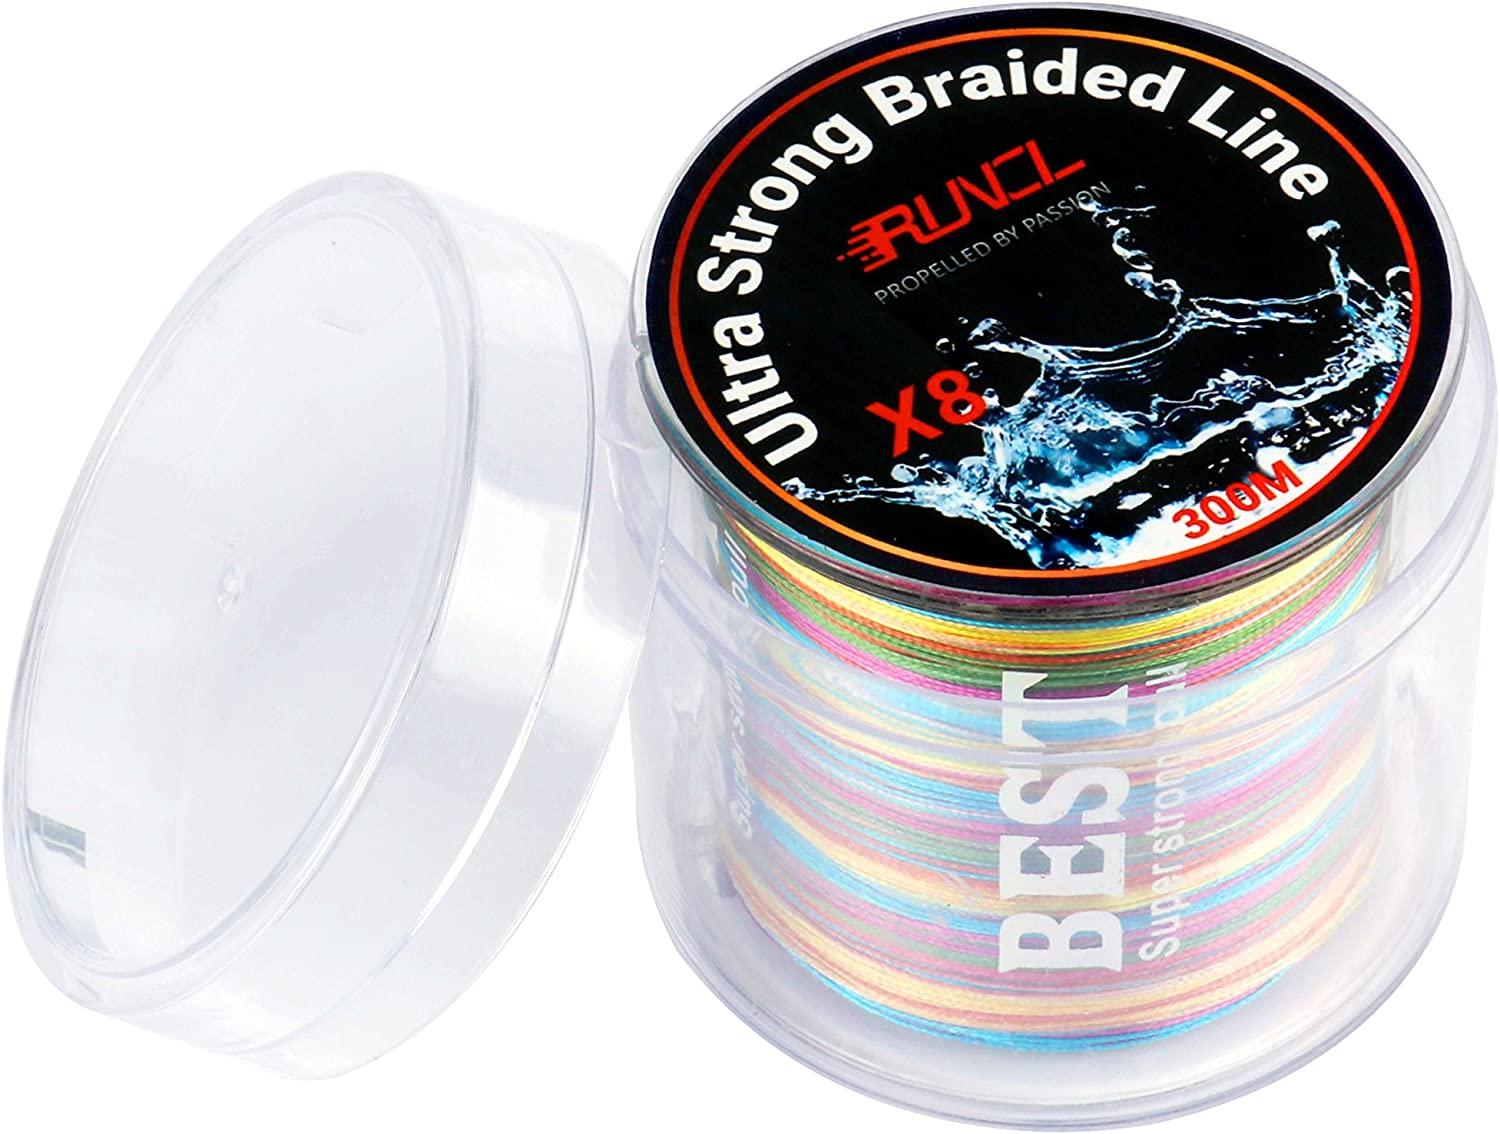 RUNCL Braided Fishing Line, 8 Strand Abrasion Resistant Braided Lines,  Super Durable, Smooth Casting, Zero Stretch, Smaller Diameter, Rainbow  Color for Extra Visibility, 328-1093 Yds, 12-100LB A - 328Yds/300M(8  Strands) 10